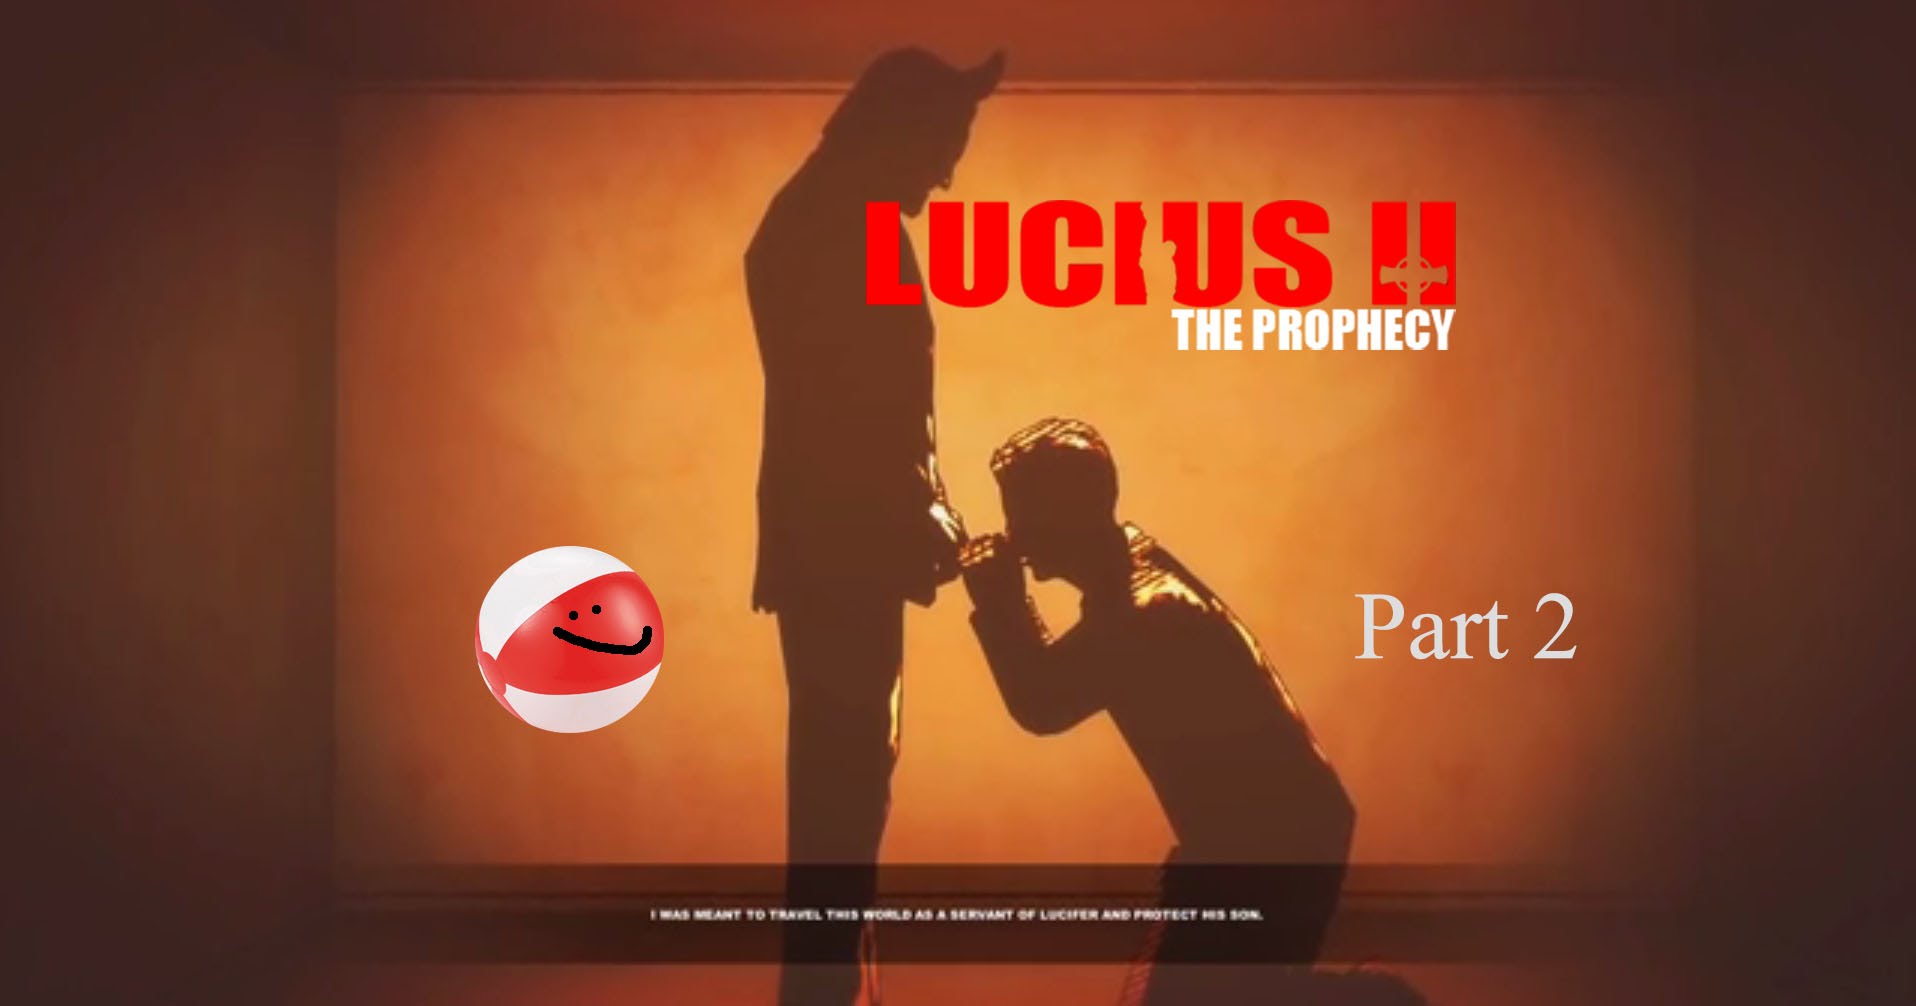 Lucius II Backgrounds, Compatible - PC, Mobile, Gadgets| 1916x1006 px